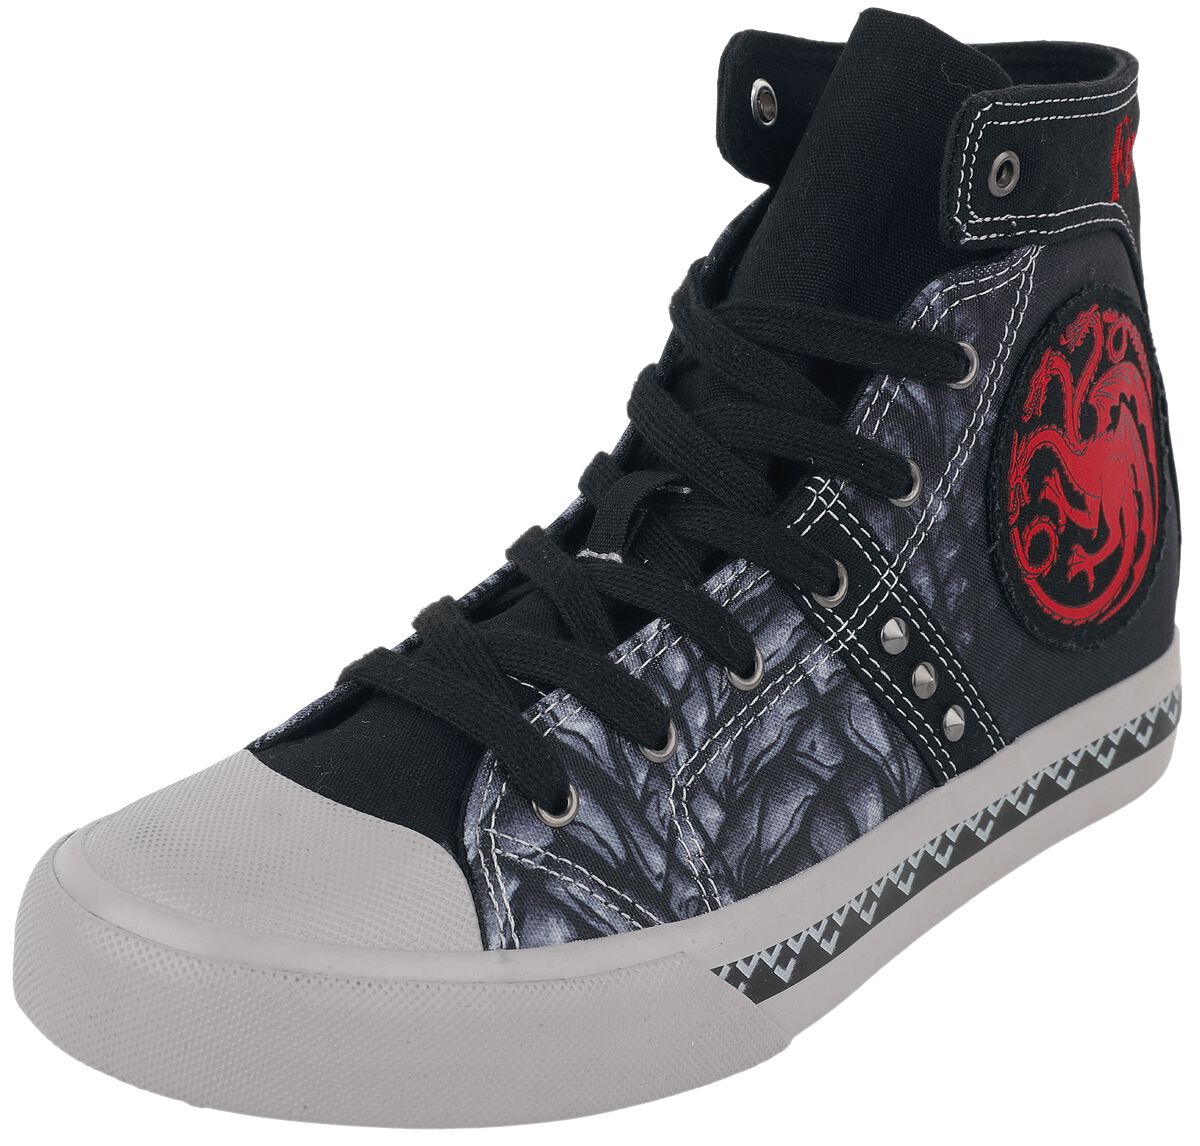 Targaryen - Fire And Blood | Game Of Thrones Sneakers High | EMP